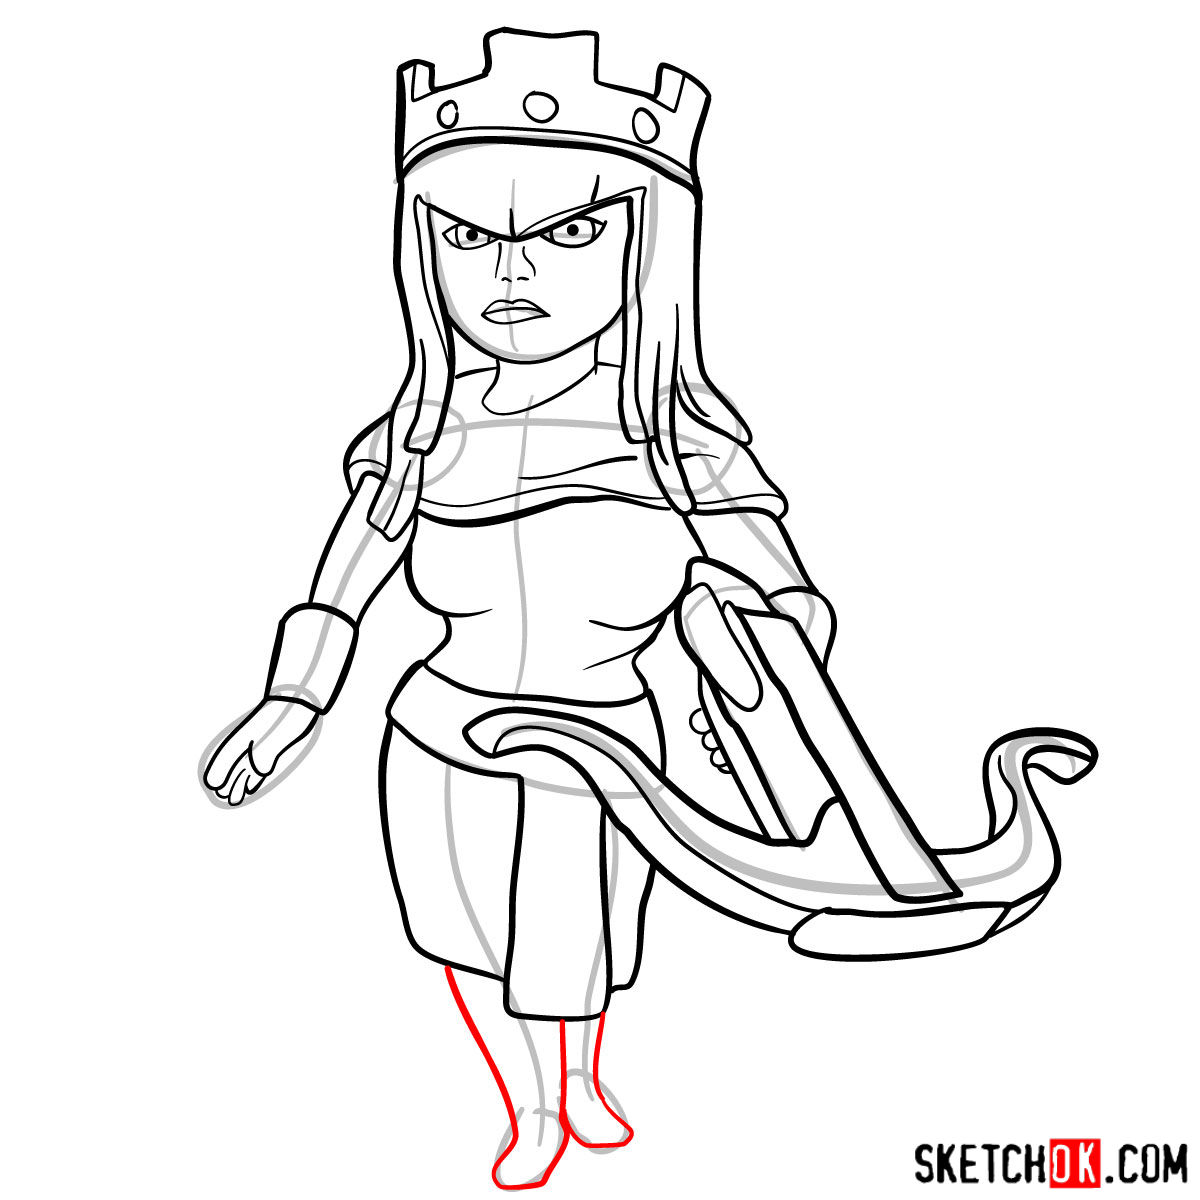 How to draw Archer Queen from Clash of Clans game - step 12